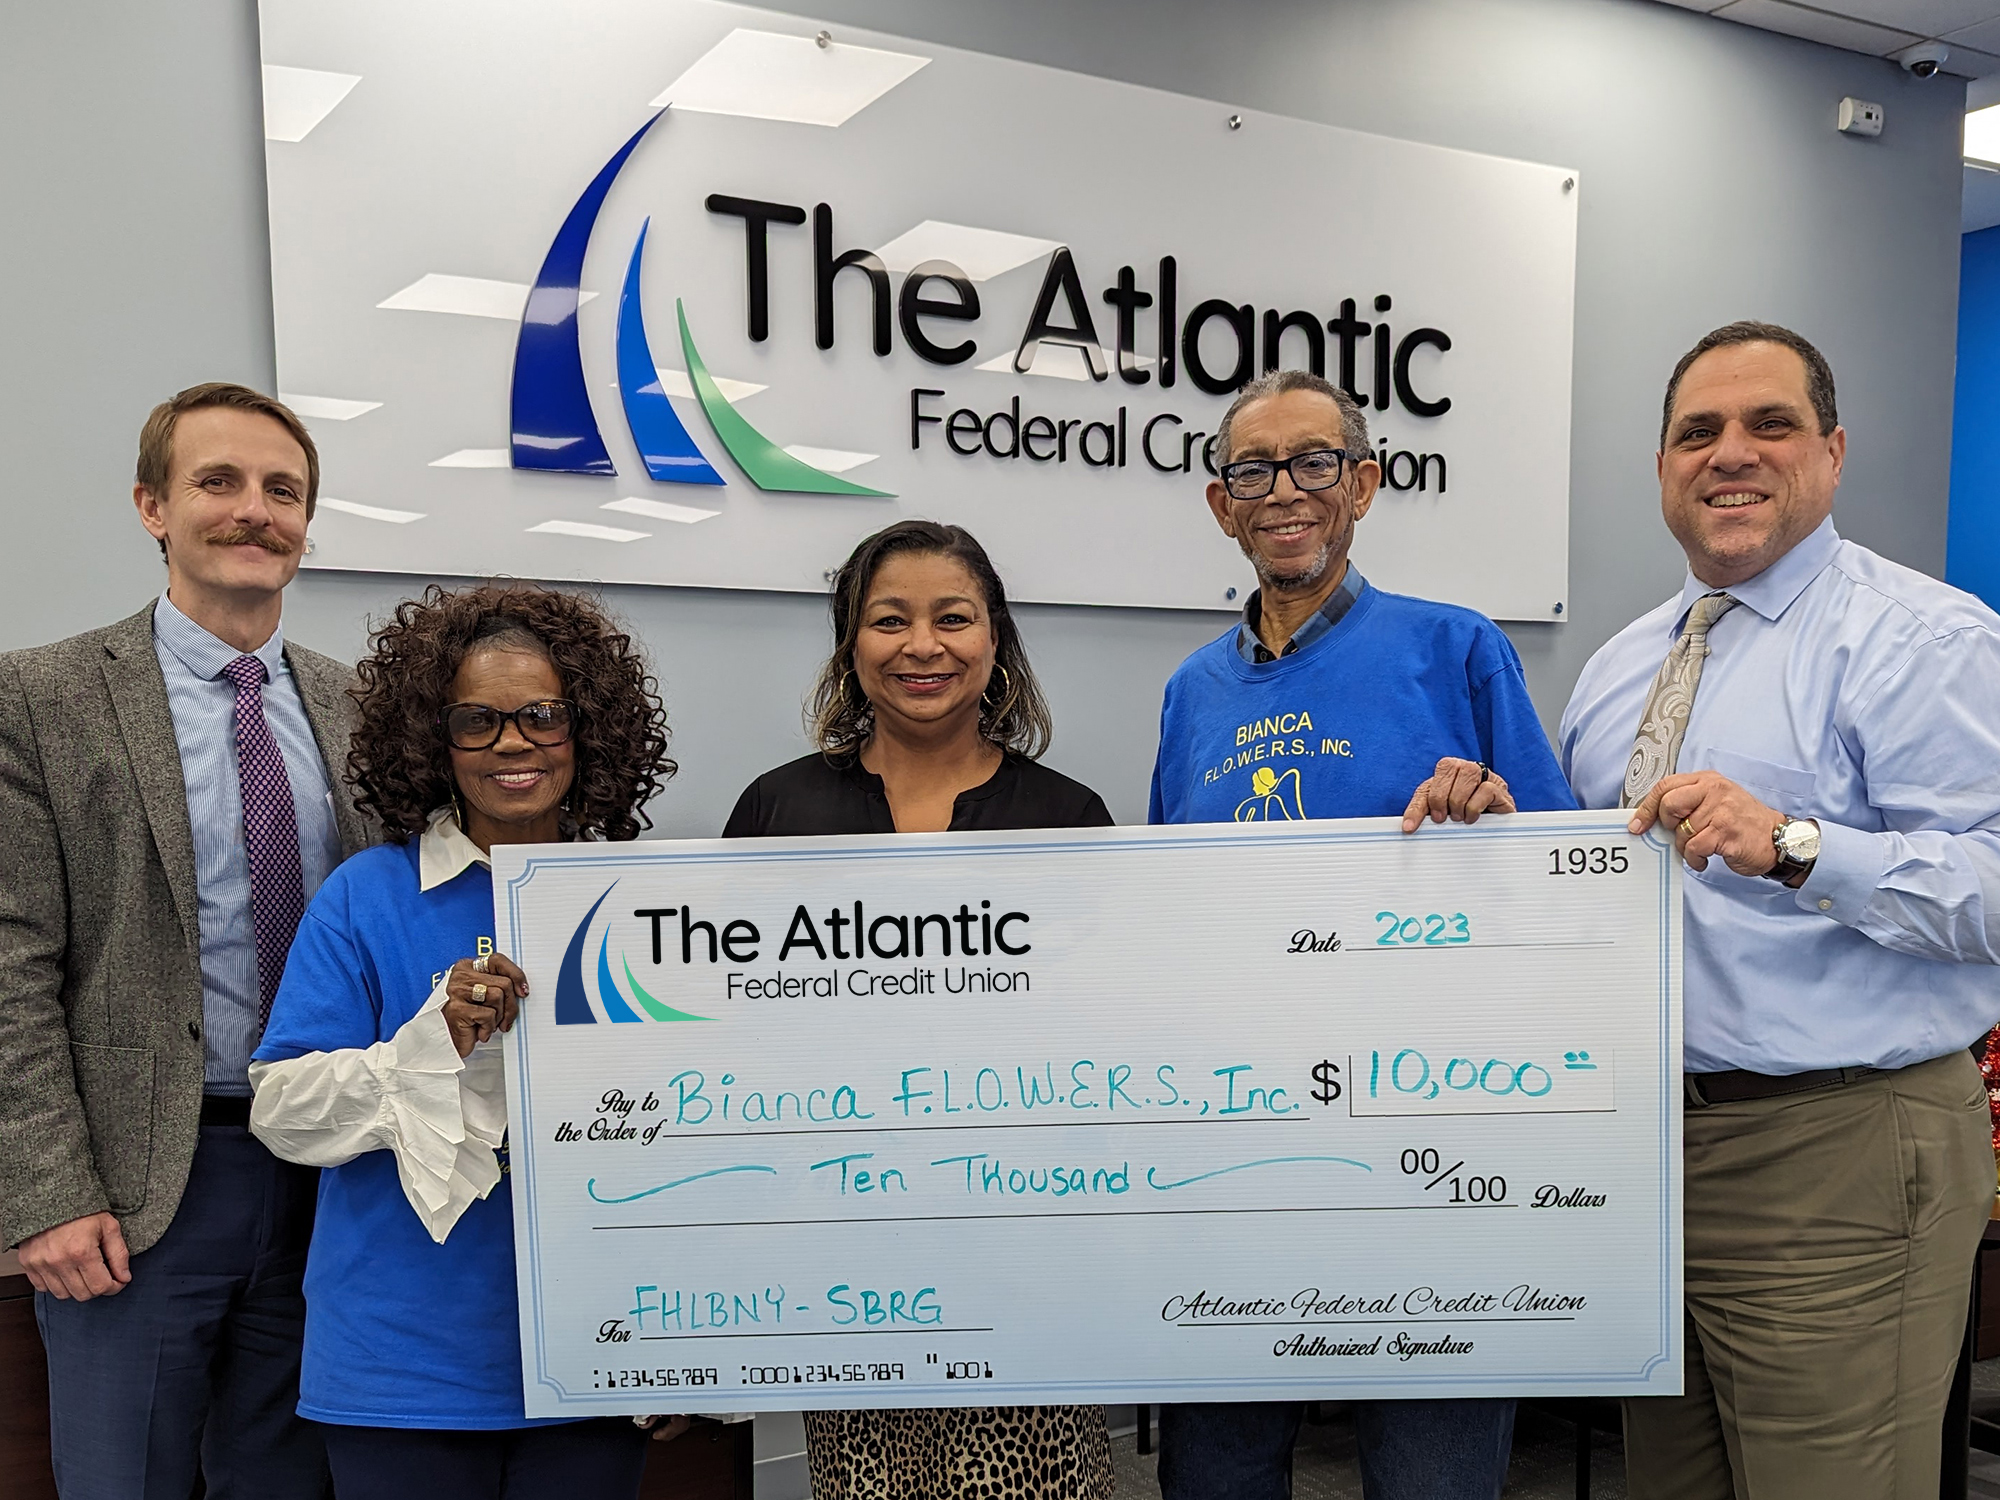 Photo of representatives from Bianca F.L.O.W.E.R.S. accepting an oversized check of $10,000 through the FHLBNY SBRG from representatives of The Atlantic